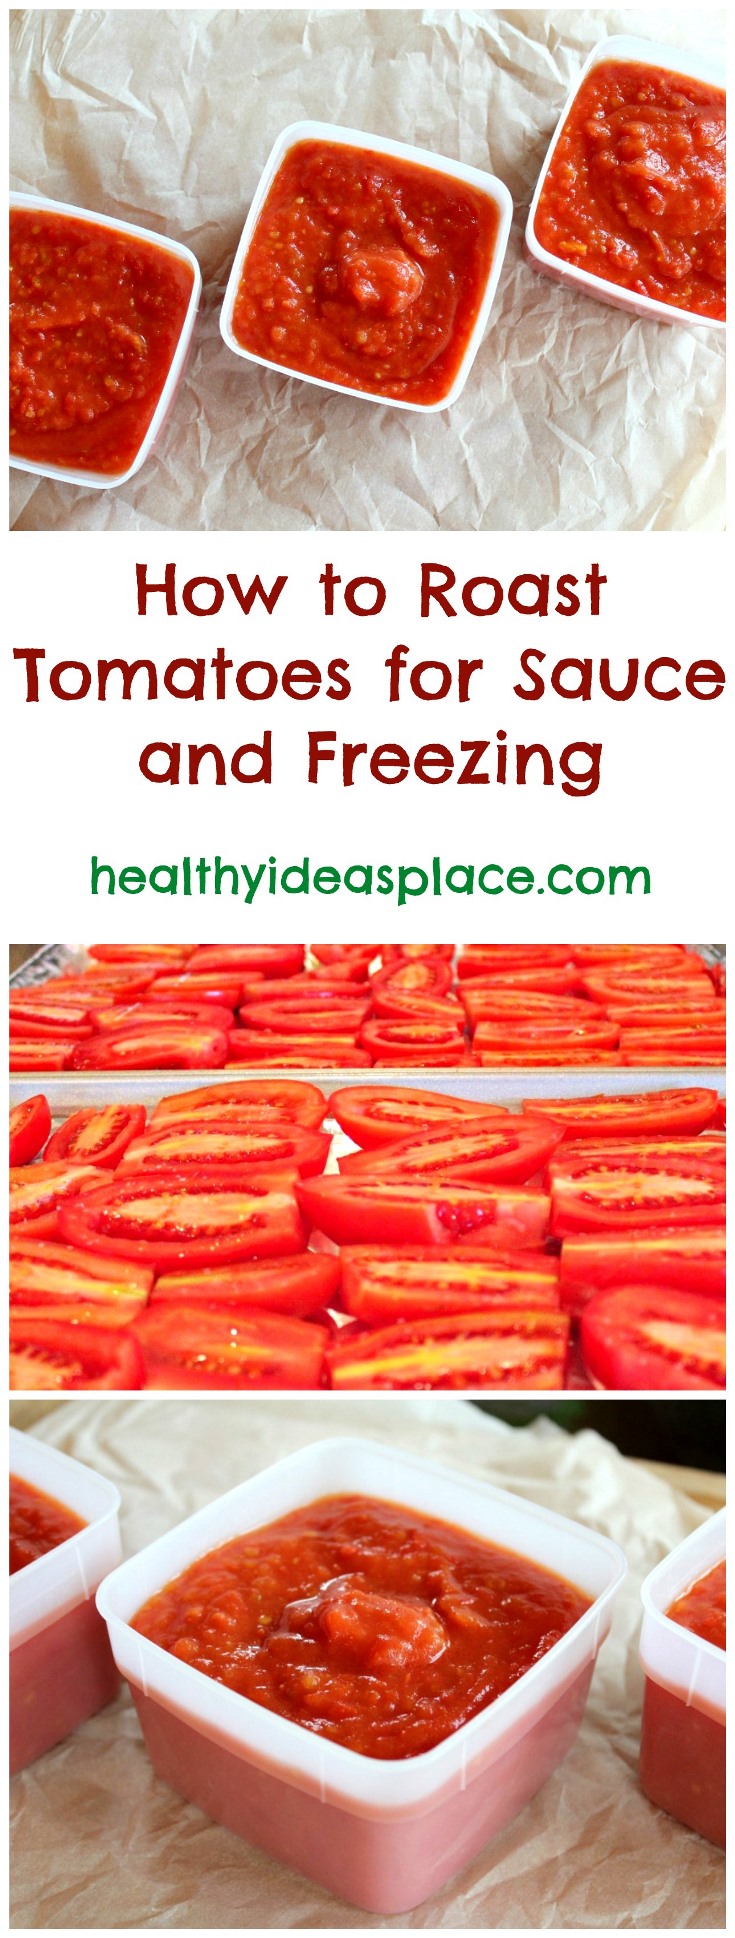 How to Roast Tomatoes for Sauce and Freezing: A tutorial on how to roast tomatoes for delicious homemade tomato sauce that you can use as a base for pasta sauce, soups, enchiladas, and freezing. 